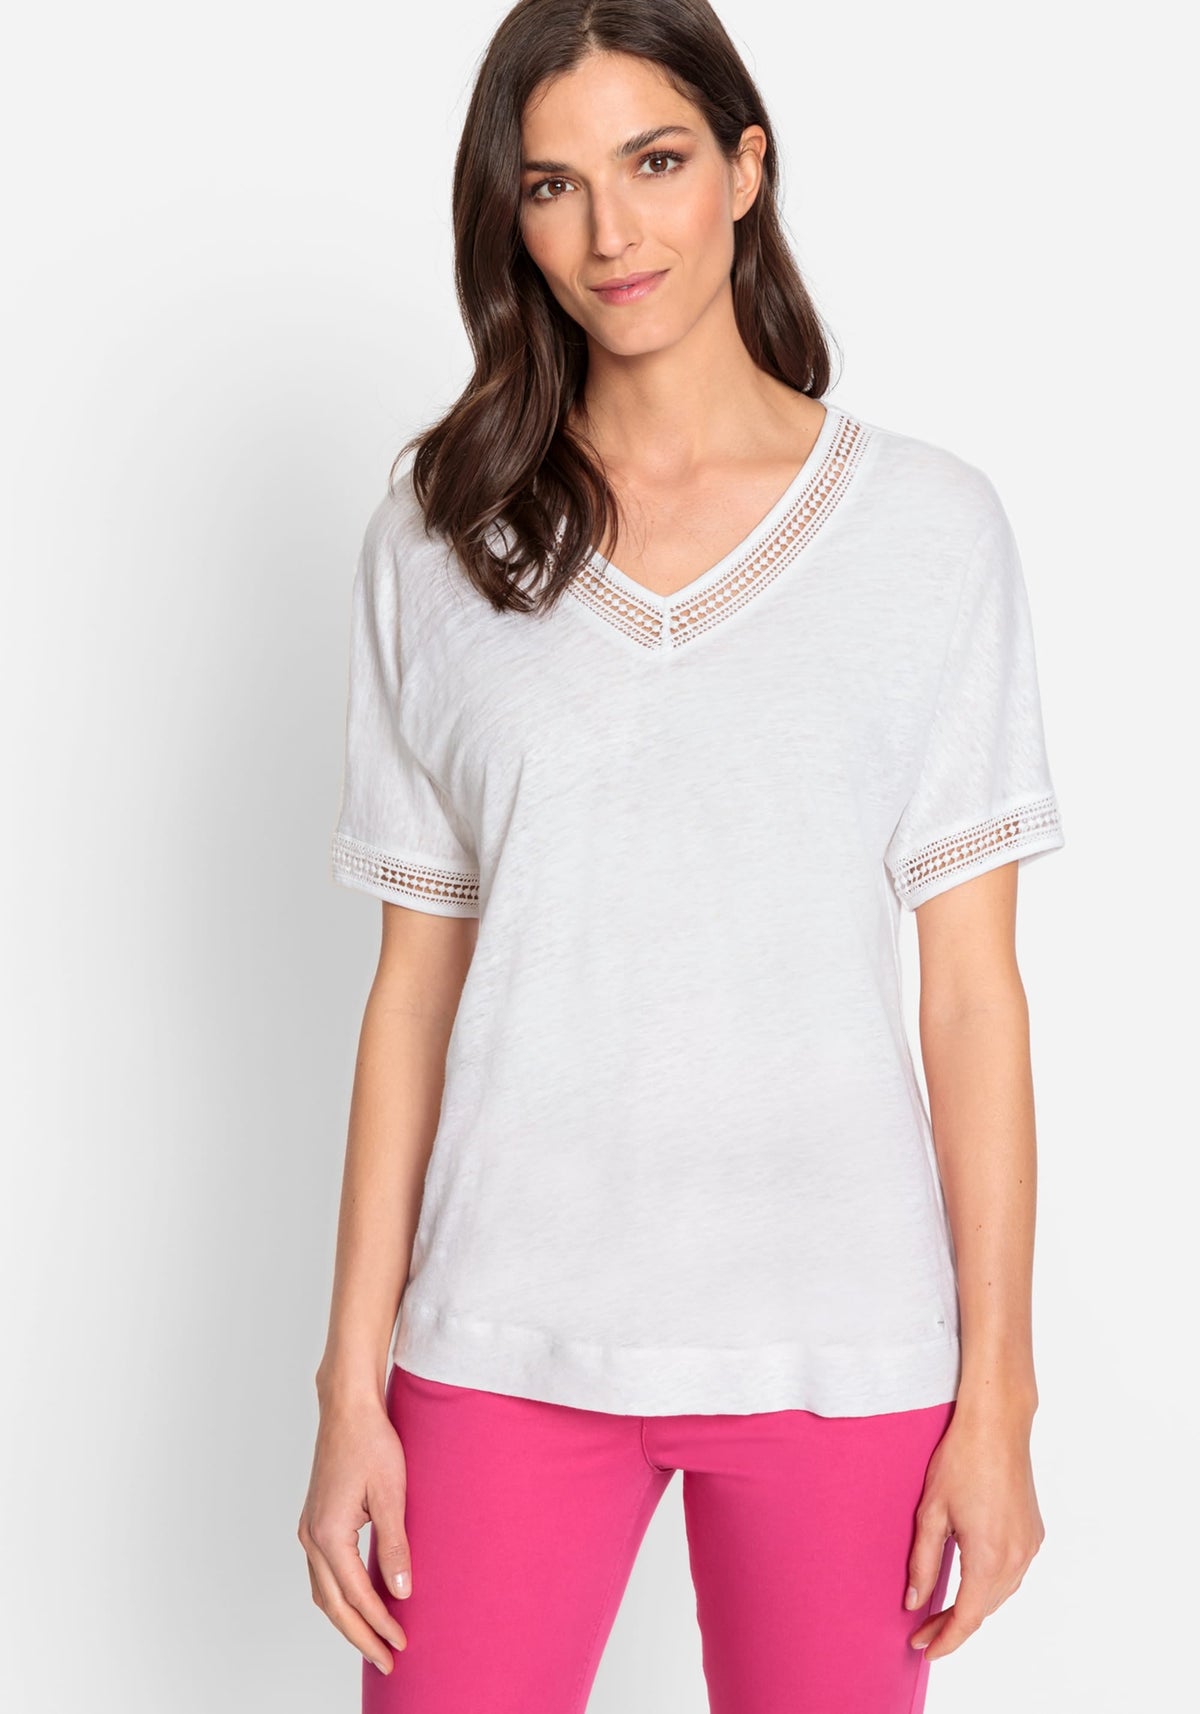 100% Linen Short Sleeve T-Shirt with Lace Trim